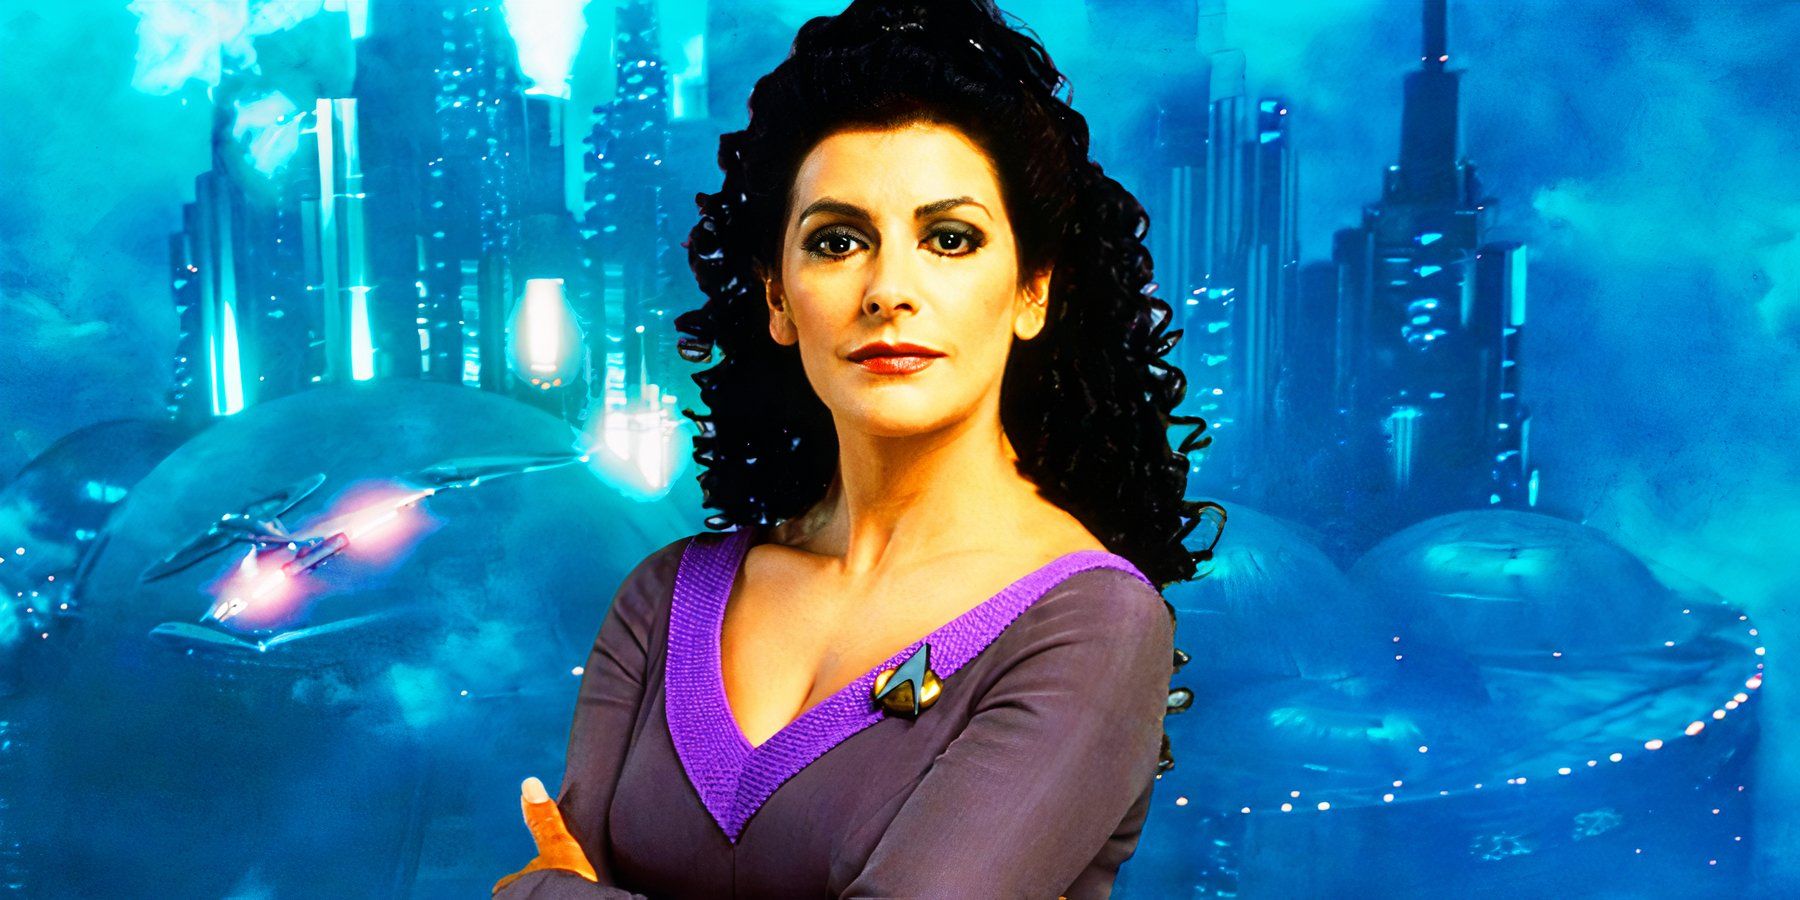 Marina Sirtis as Counselor Deanna Troi and the Eternal Gallery from Star Trek: Discovery